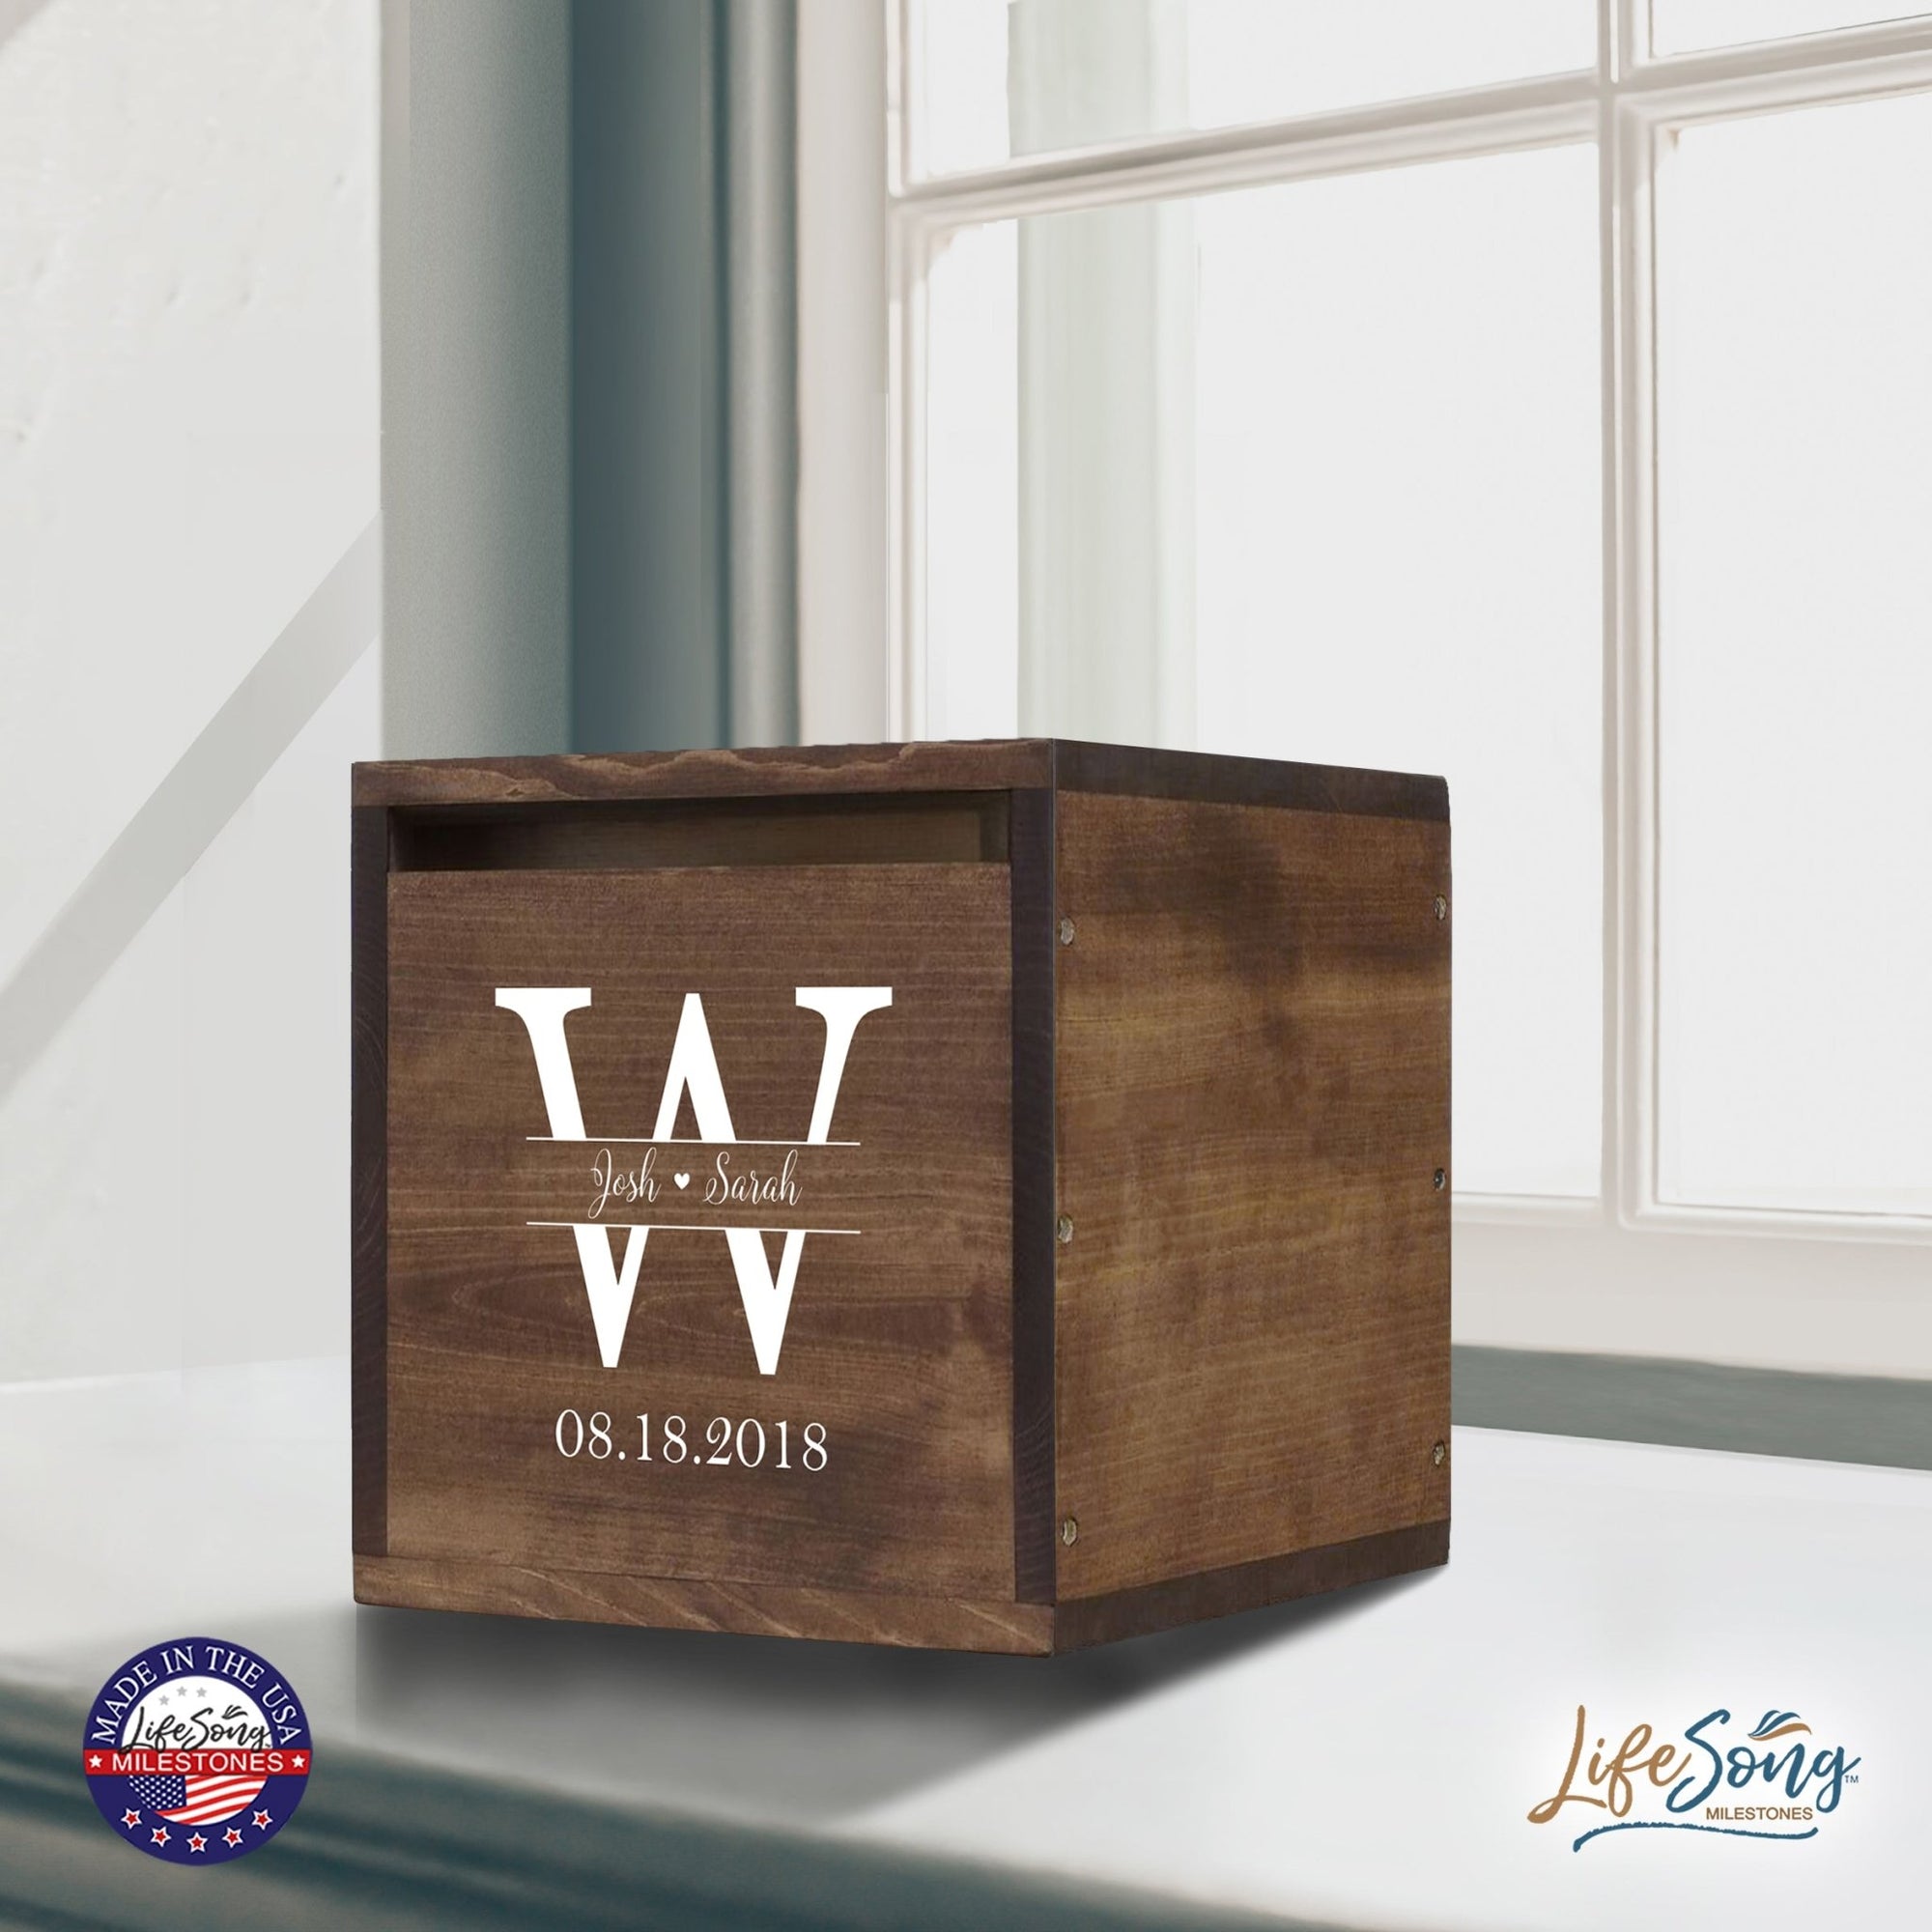 Personalized Wooden Card Box for Wedding Ceremonies, Venues, Receptions, Bridal Showers, and Engagement Parties 13.5x12 - Josh & Sarah (W) - LifeSong Milestones